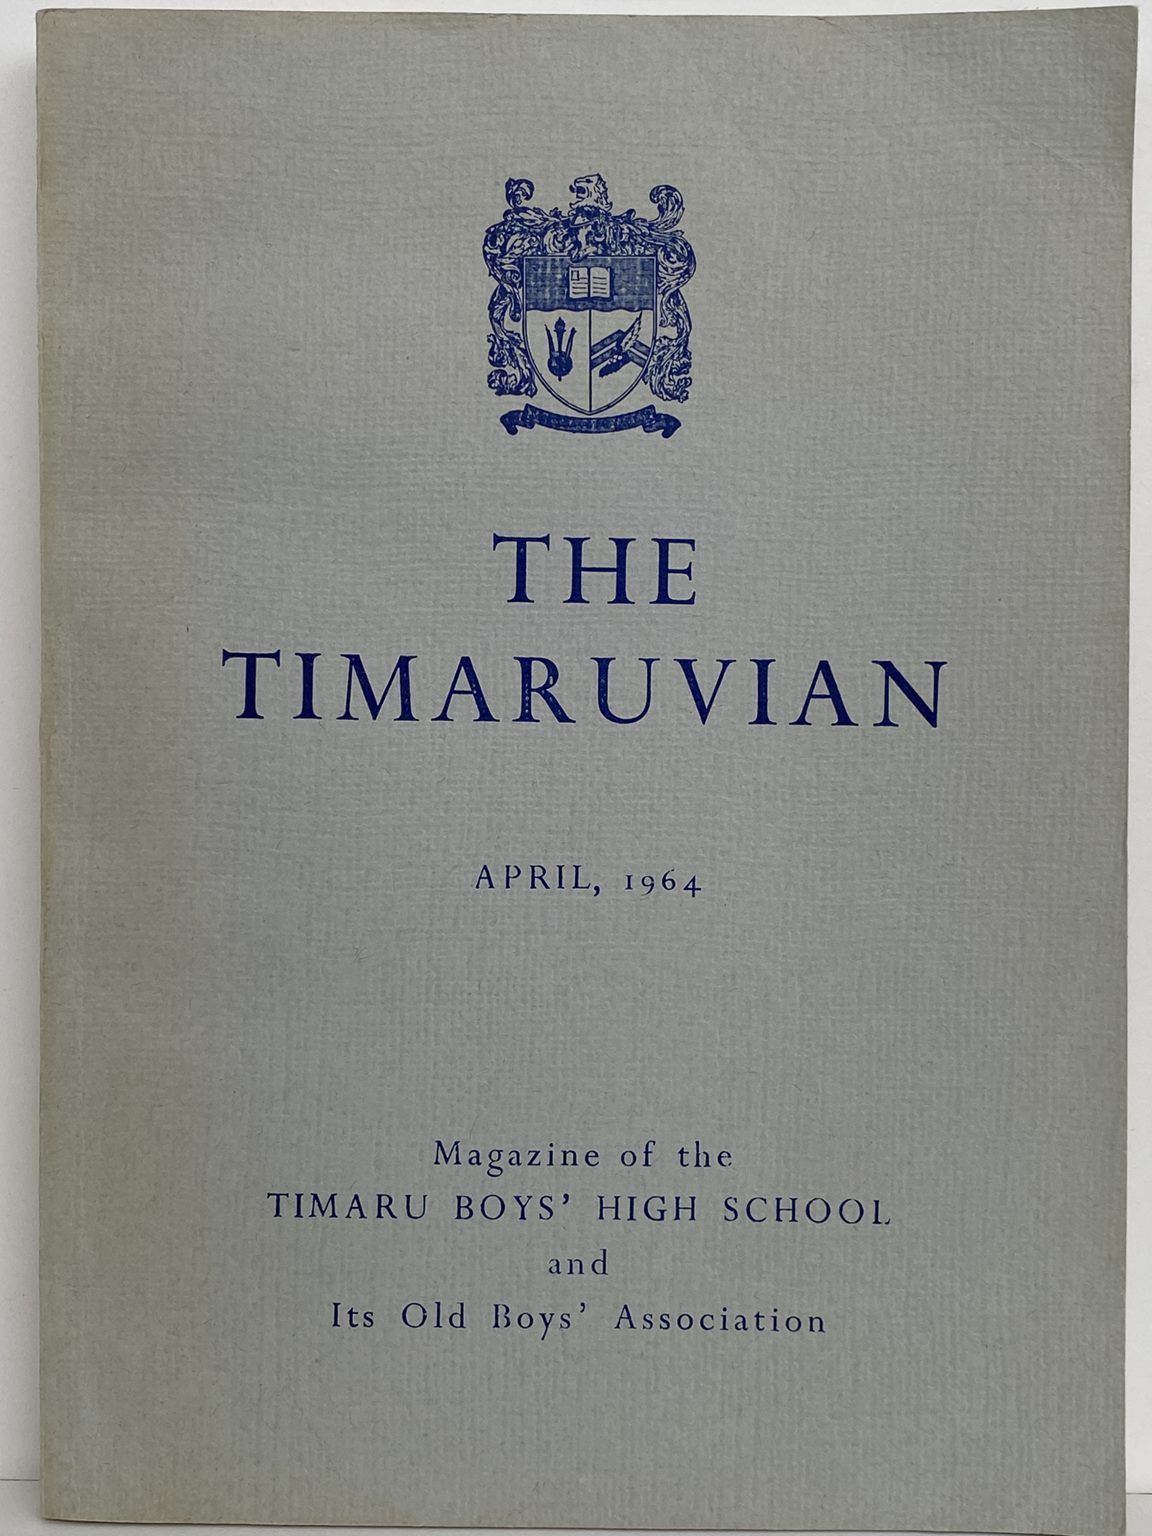 THE TIMARUVIAN: Magazine of the Timaru Boys' High School and its Old Boys' Association 1964